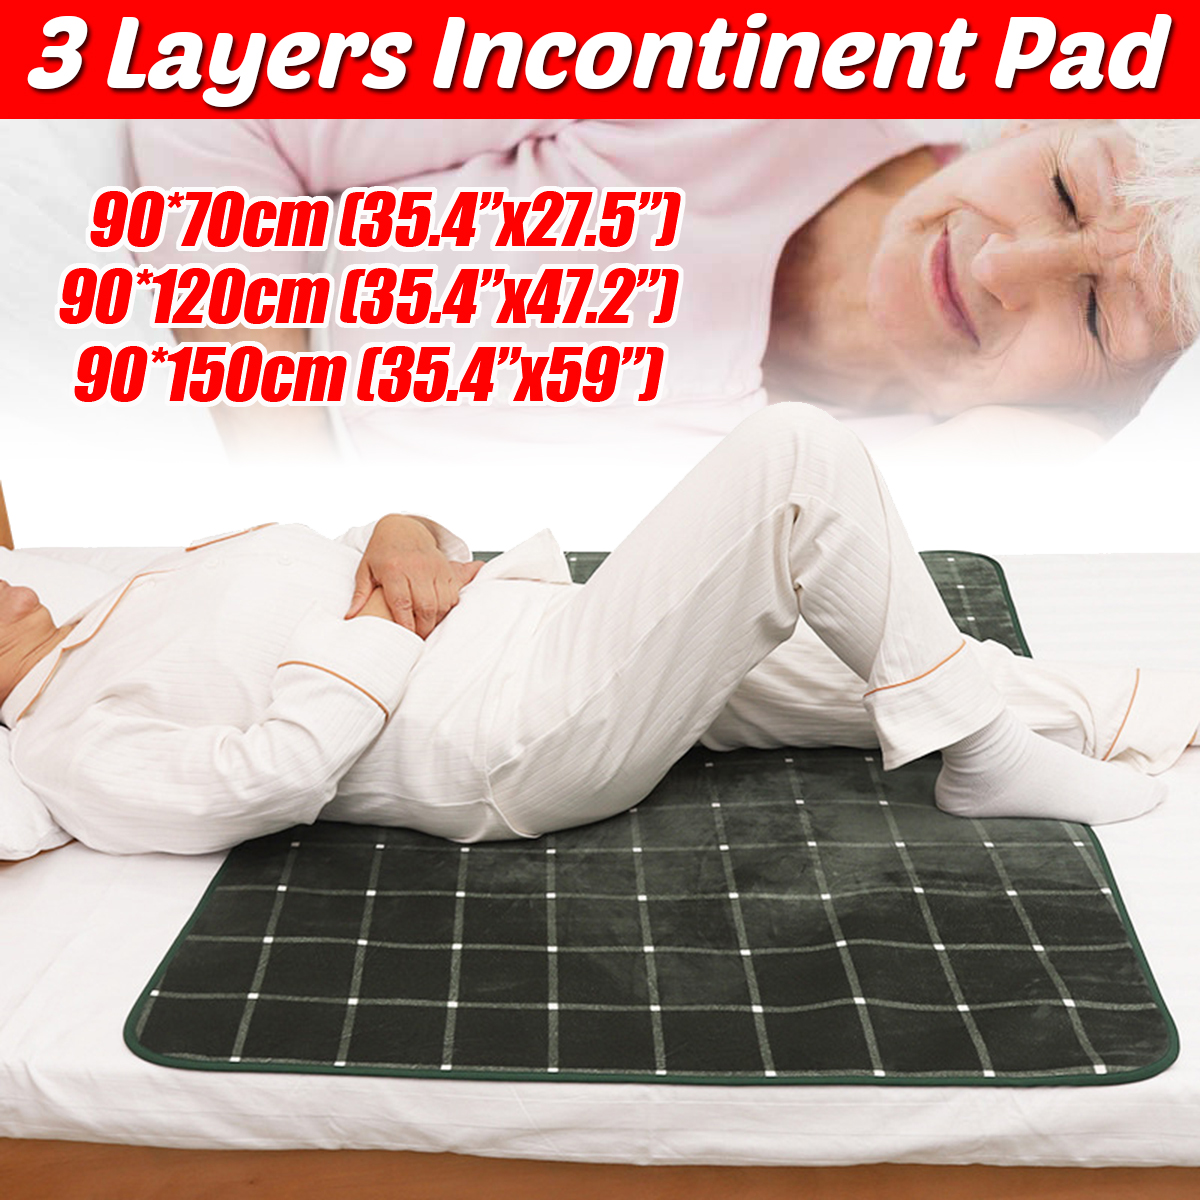 Washable Reusable Waterproof Underpad Bed Cushion Incontinence Kids Adult Mattress Protector 1